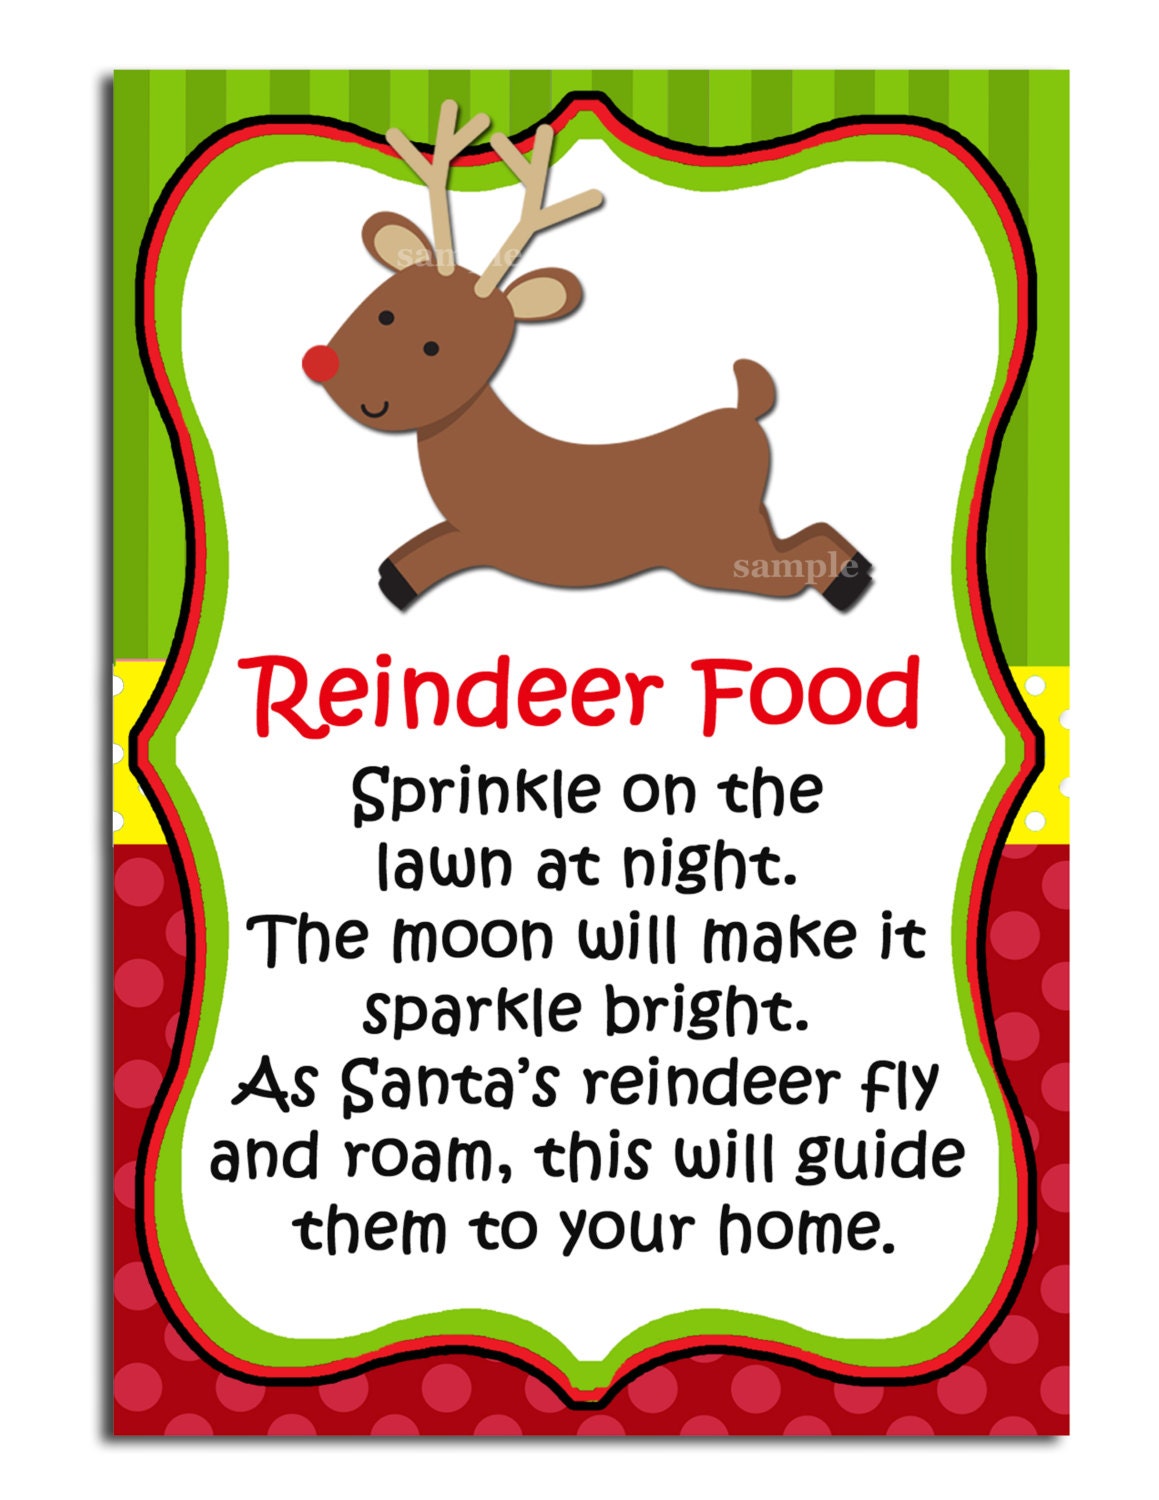 haus-garten-72-x-christmas-non-personalised-wrapping-seal-stickers-present-reindeer-food-756